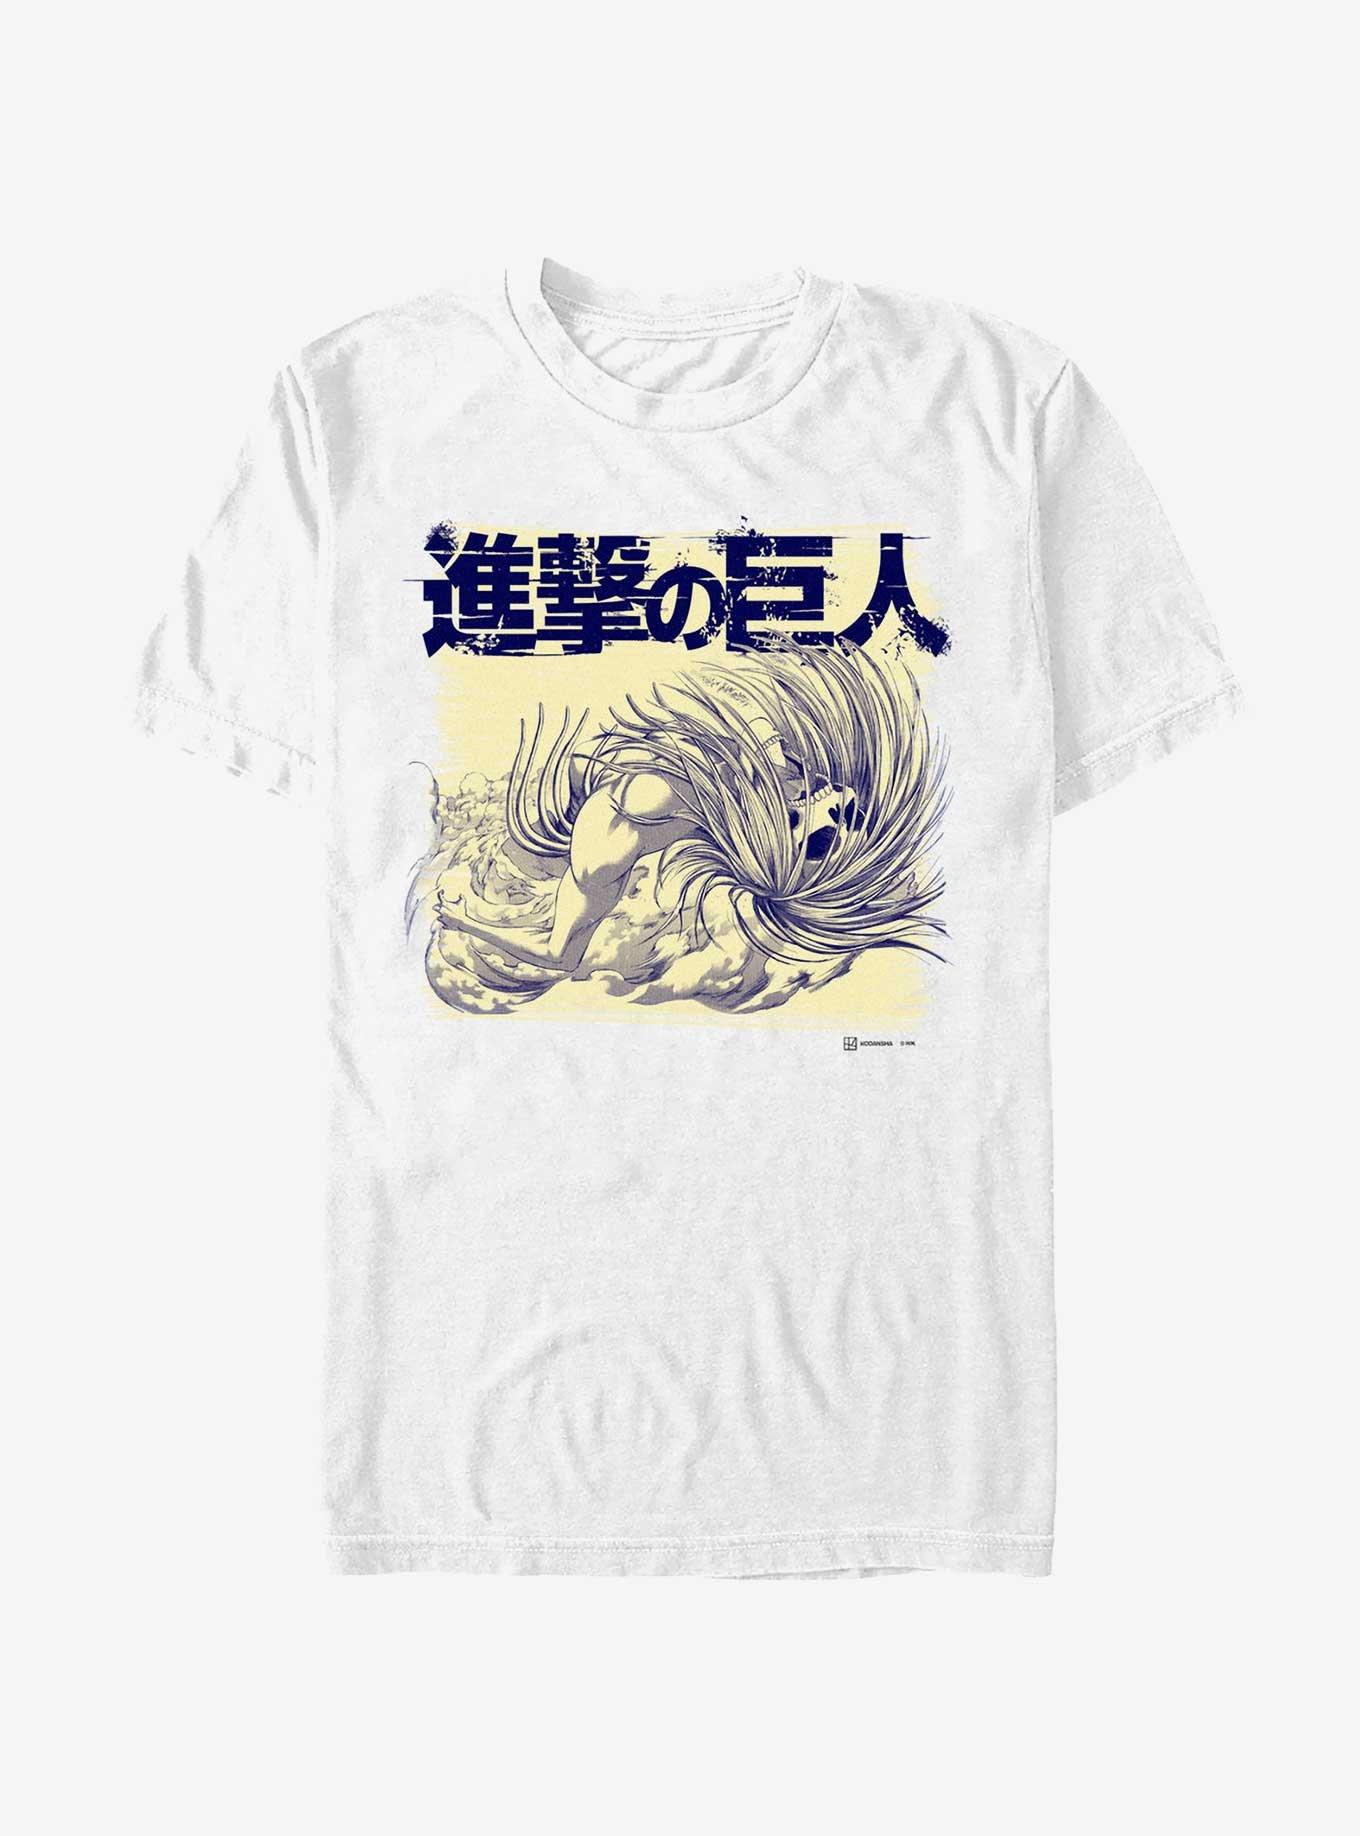 Attack on Titan Finding Overlay T-Shirt